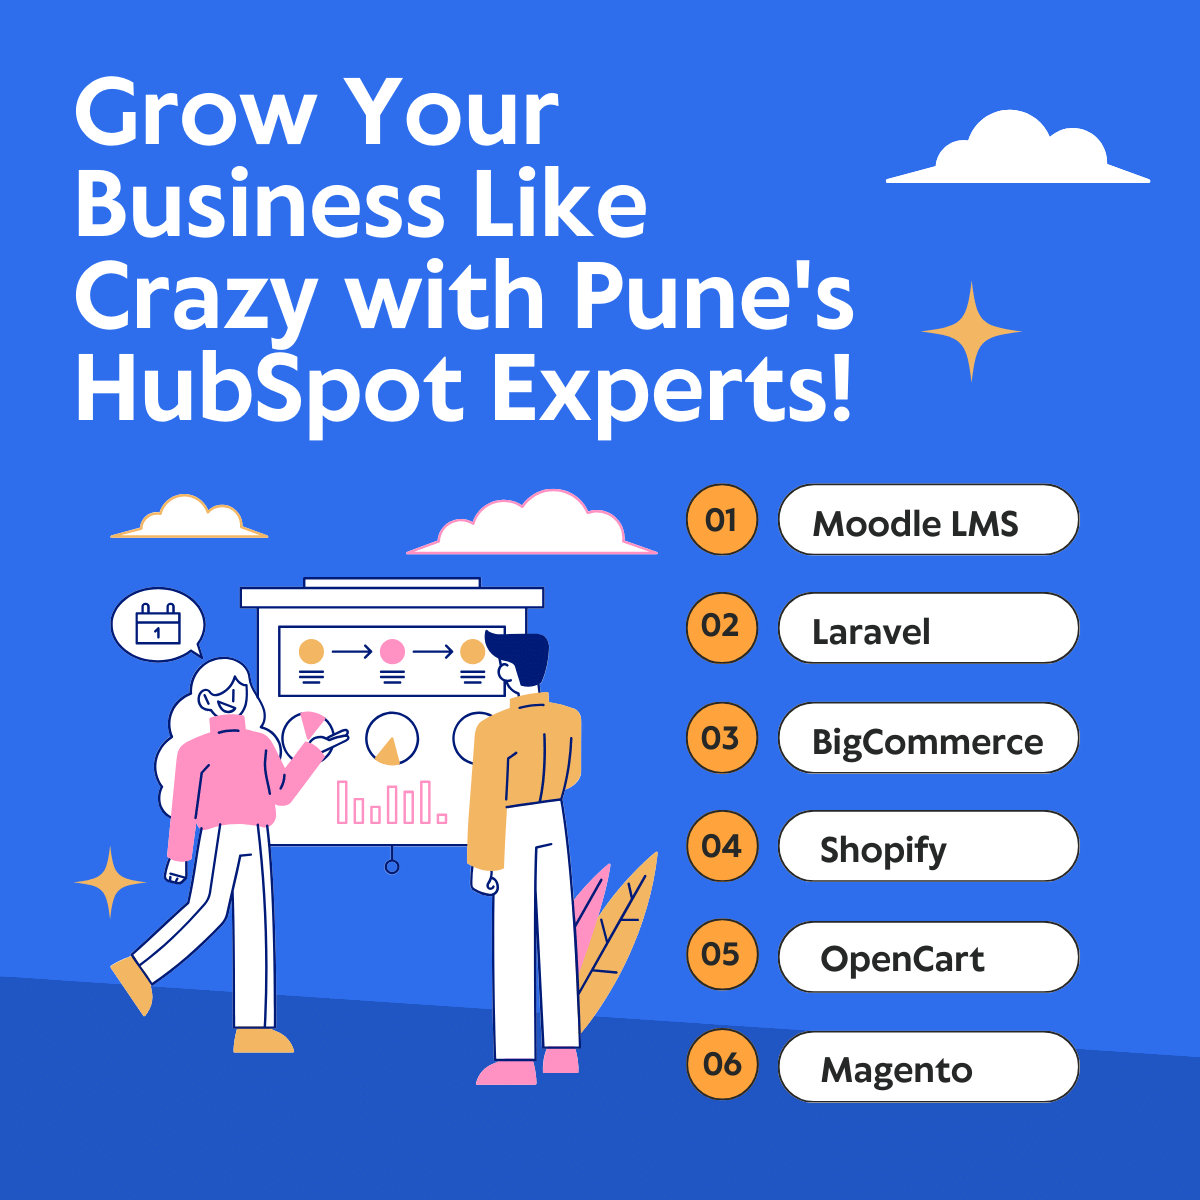 Grow Your Business Like Crazy with Pune's HubSpot Experts!